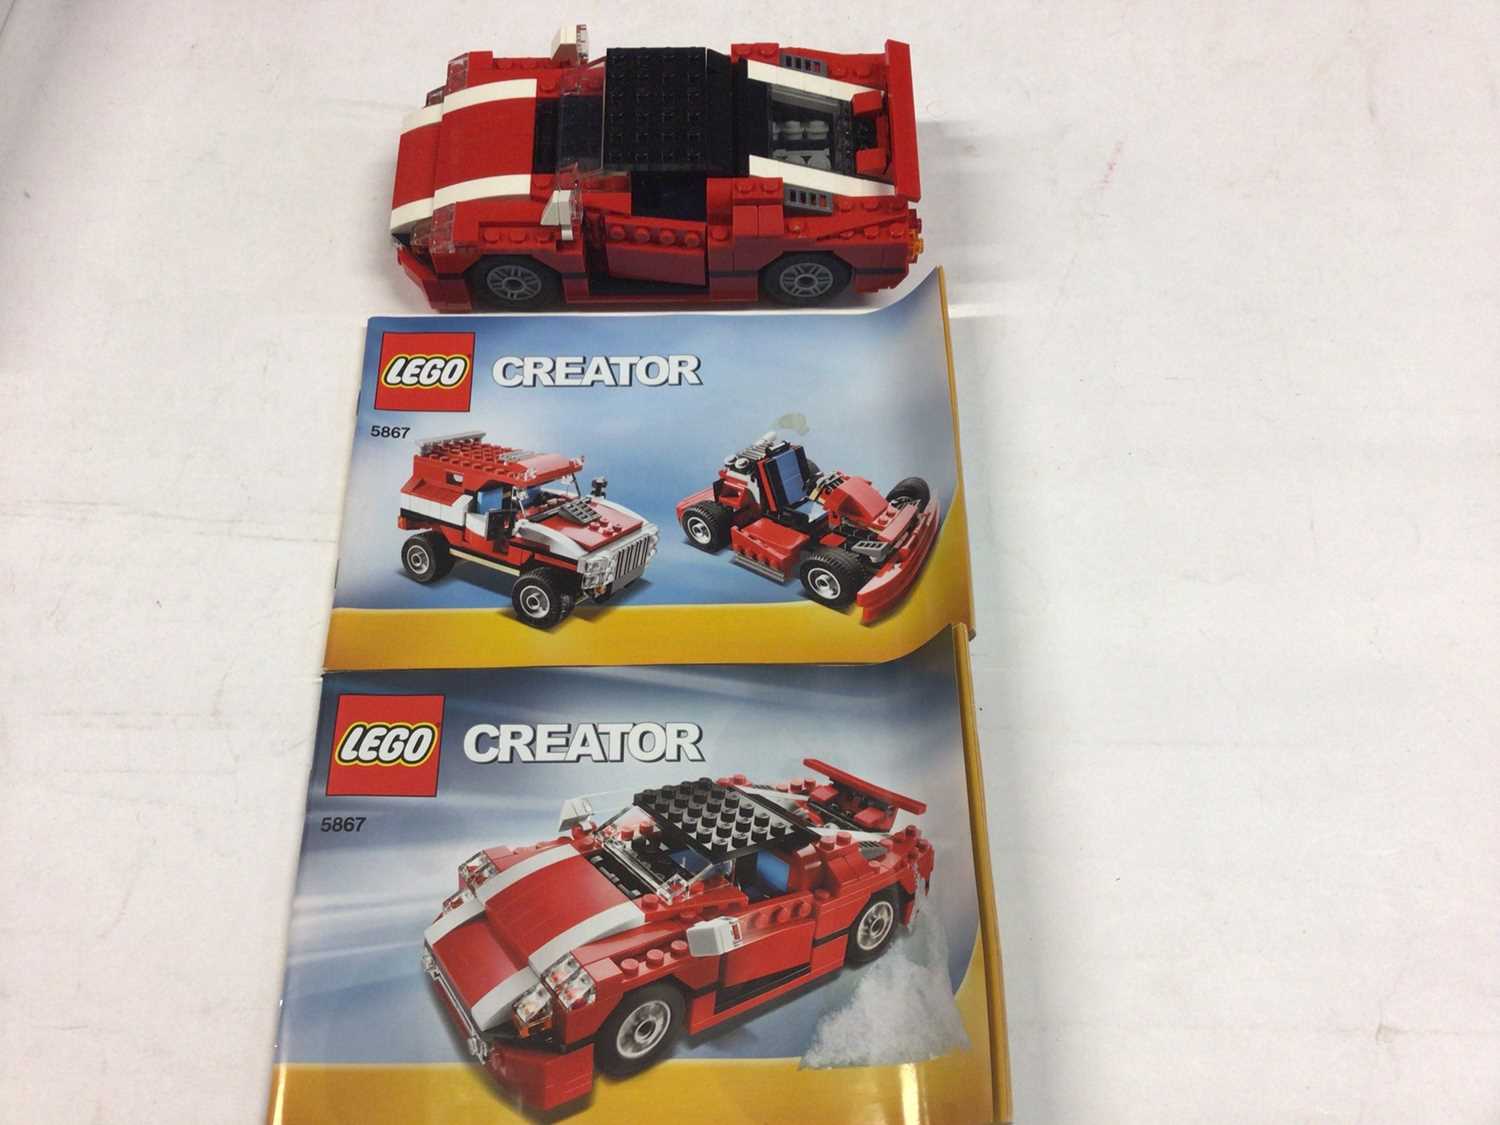 Lot 76 - Lego 5489 Ultimate Building Set, 5867 Super Speedster Car with instructions, 8674 Ferrari F1, 395 Rolls Royce with instructions available on line, no boxes